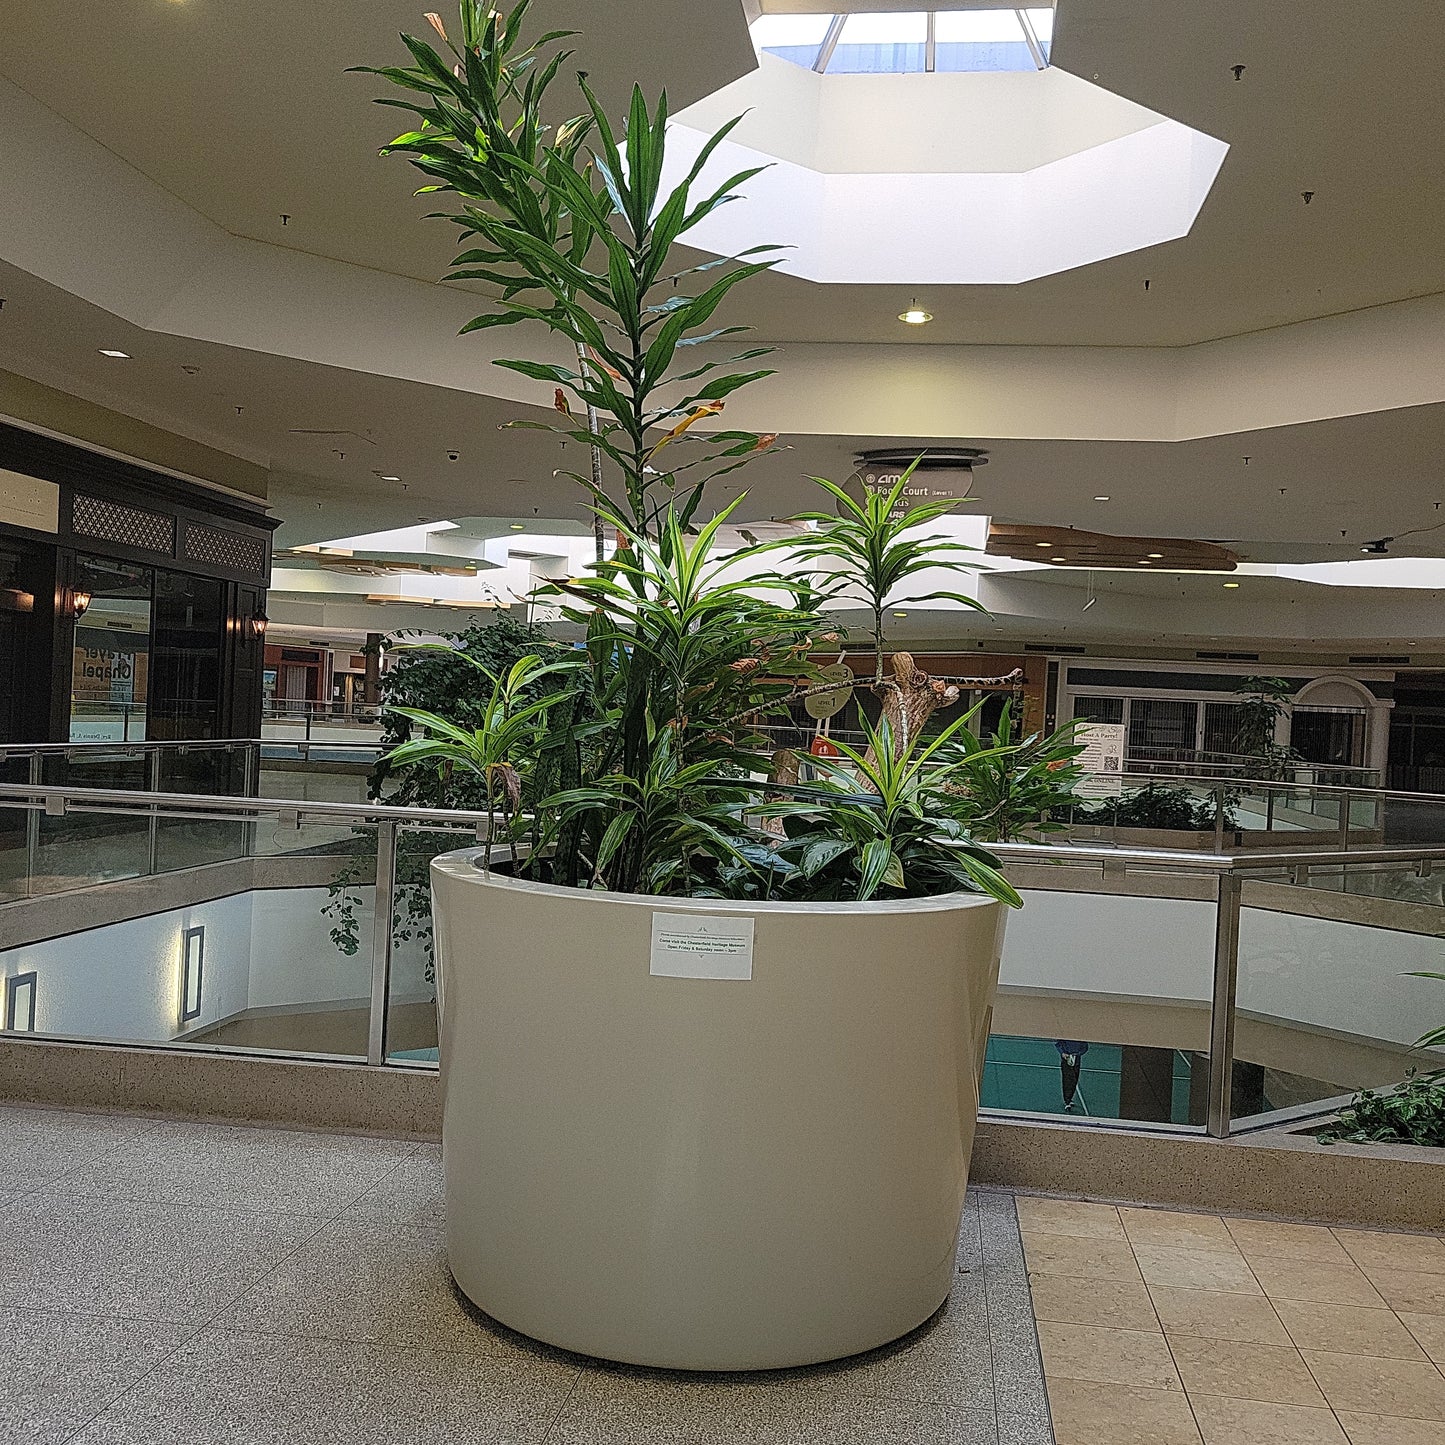 Huge Flower Pot with Foliage